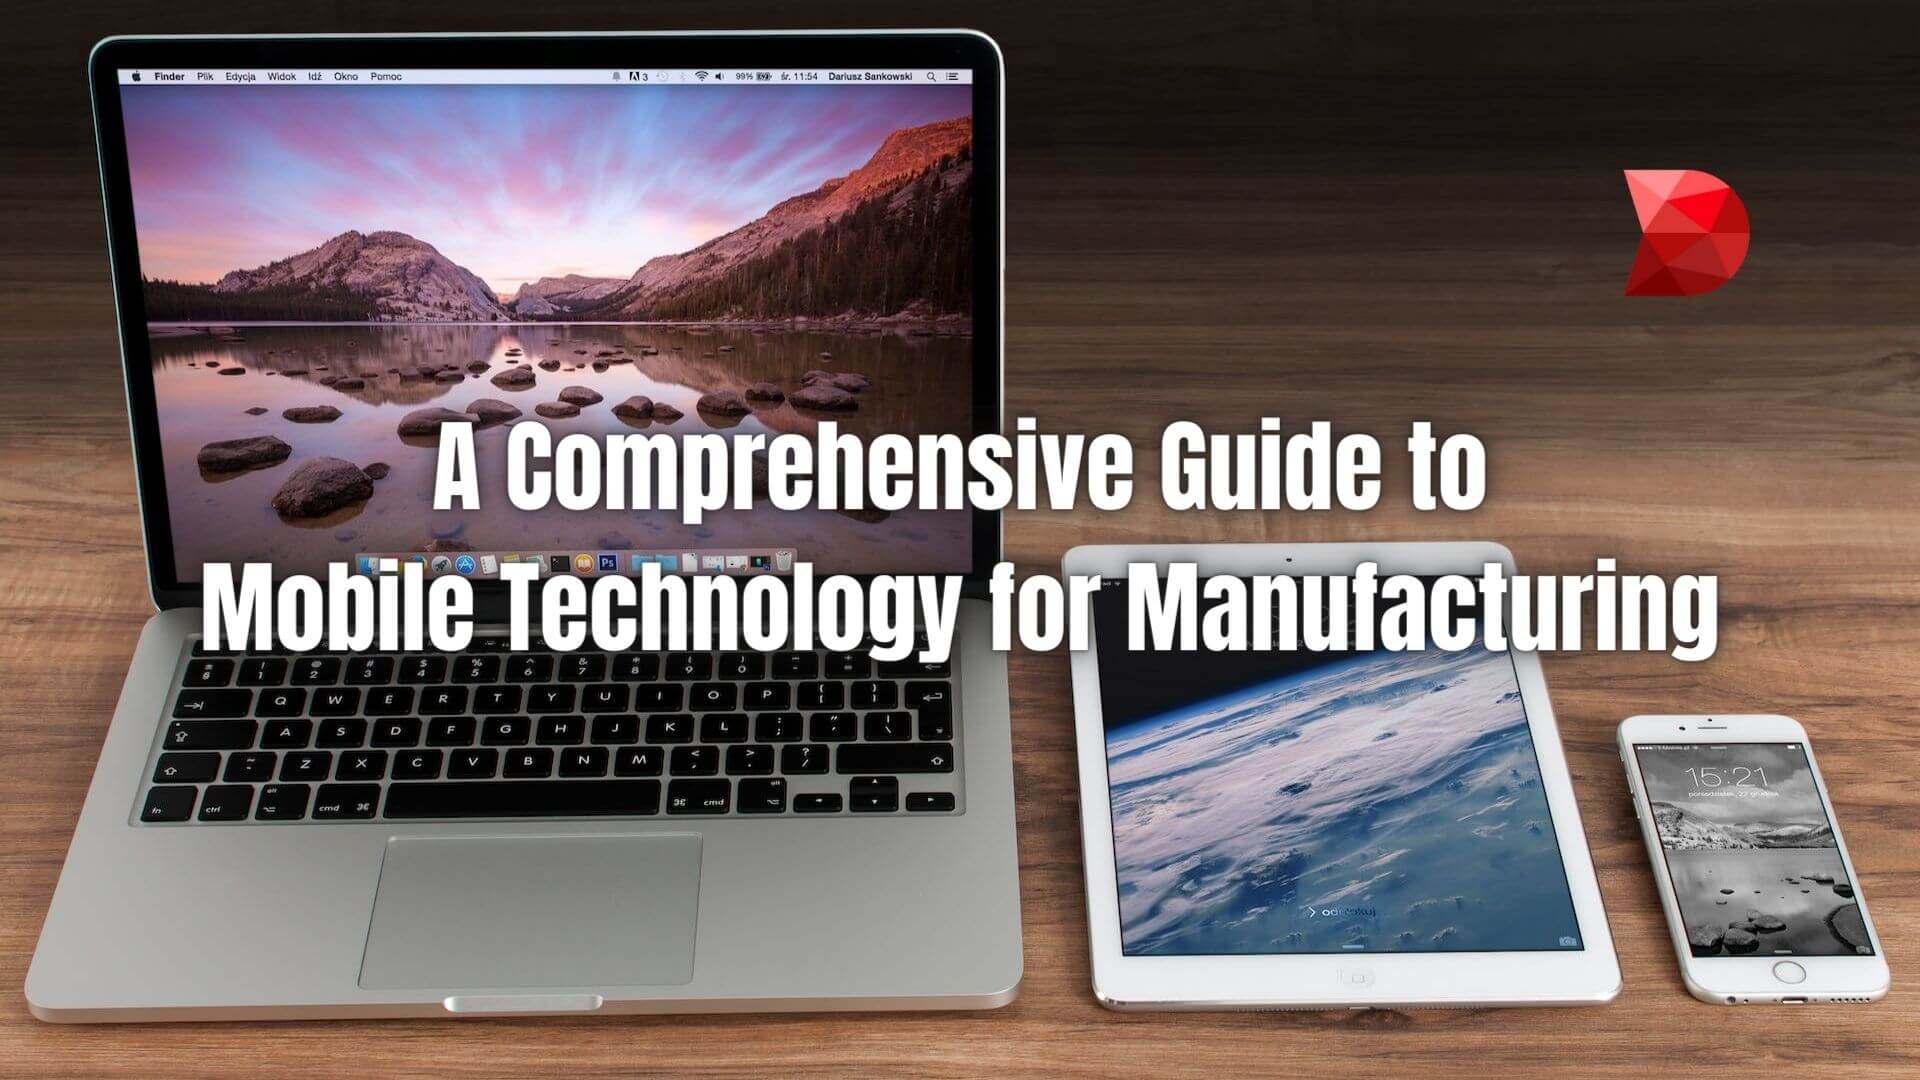 This article will discuss why the manufacturing industry benefits from mobile technology and how it is changing the industry. Learn more!